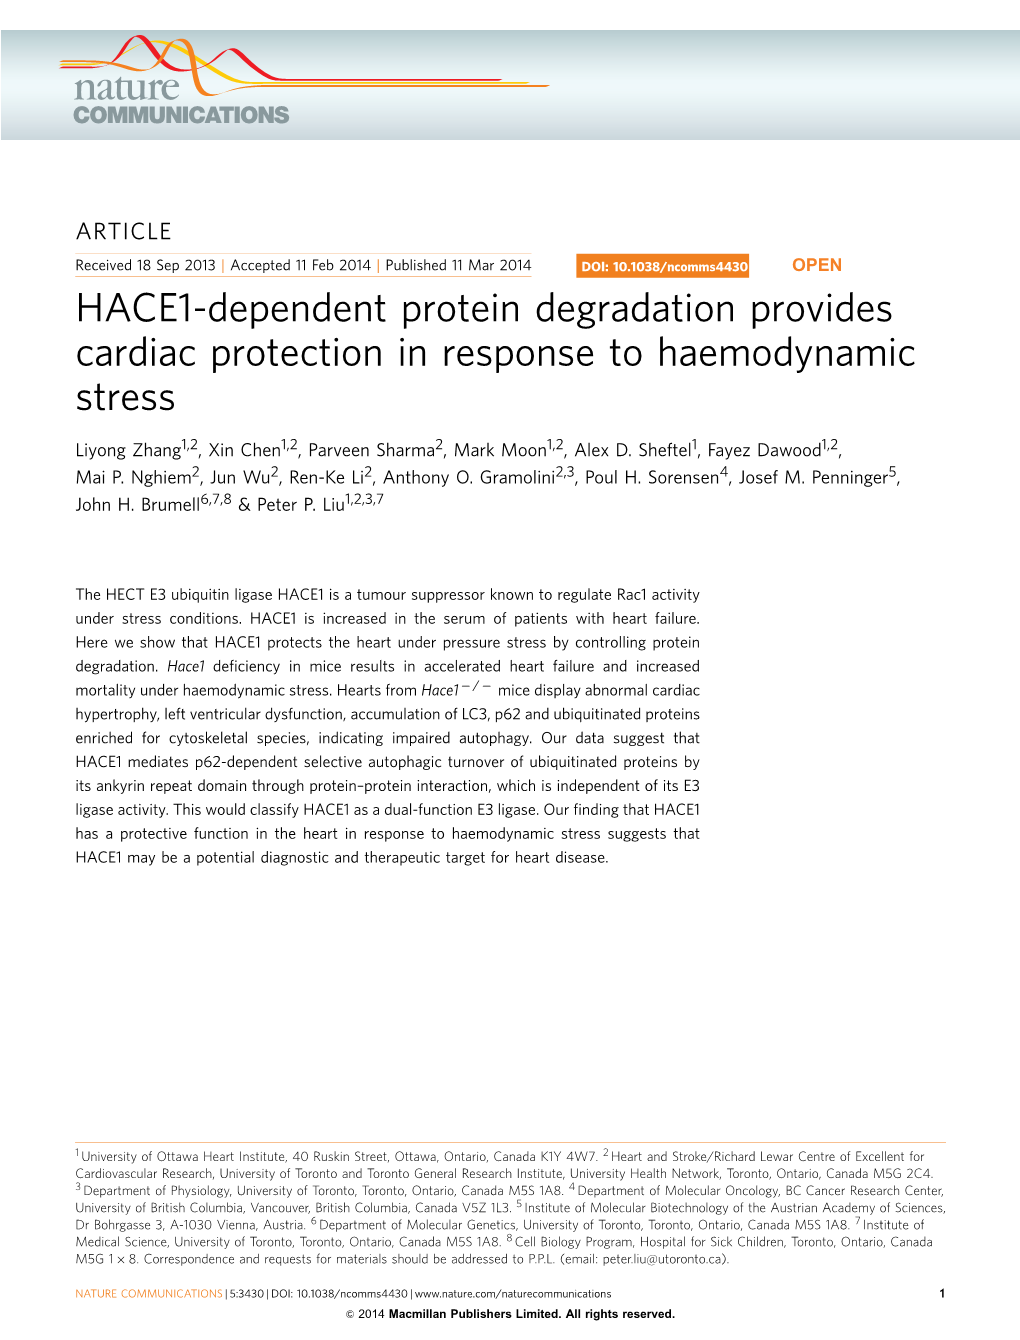 HACE1-Dependent Protein Degradation Provides Cardiac Protection in Response to Haemodynamic Stress